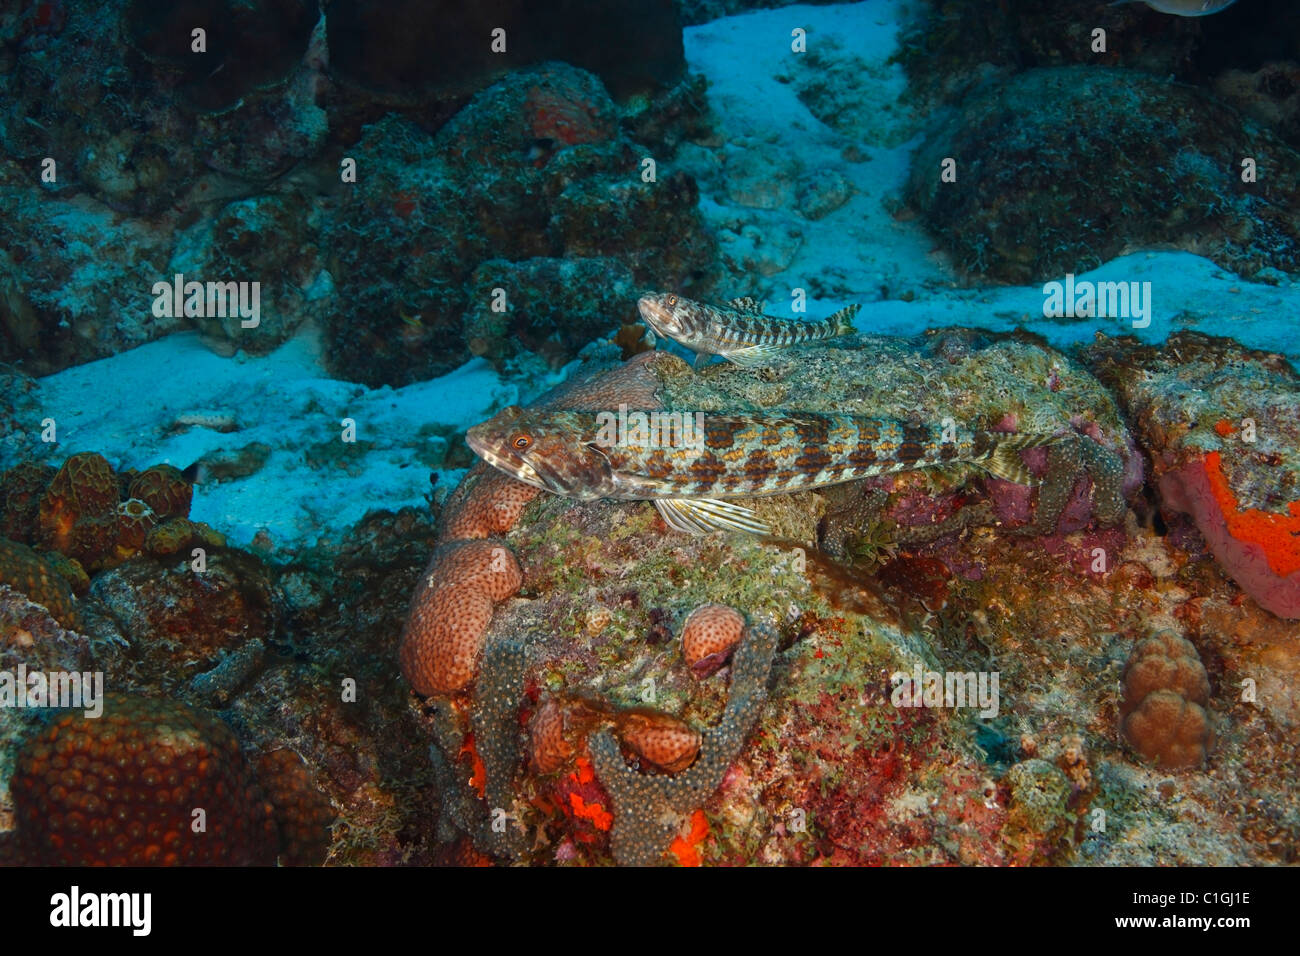 Sand Diver (Synodus intermedius), a pair resting on a coral reef in Bonaire, Netherlands Antilles. Stock Photo